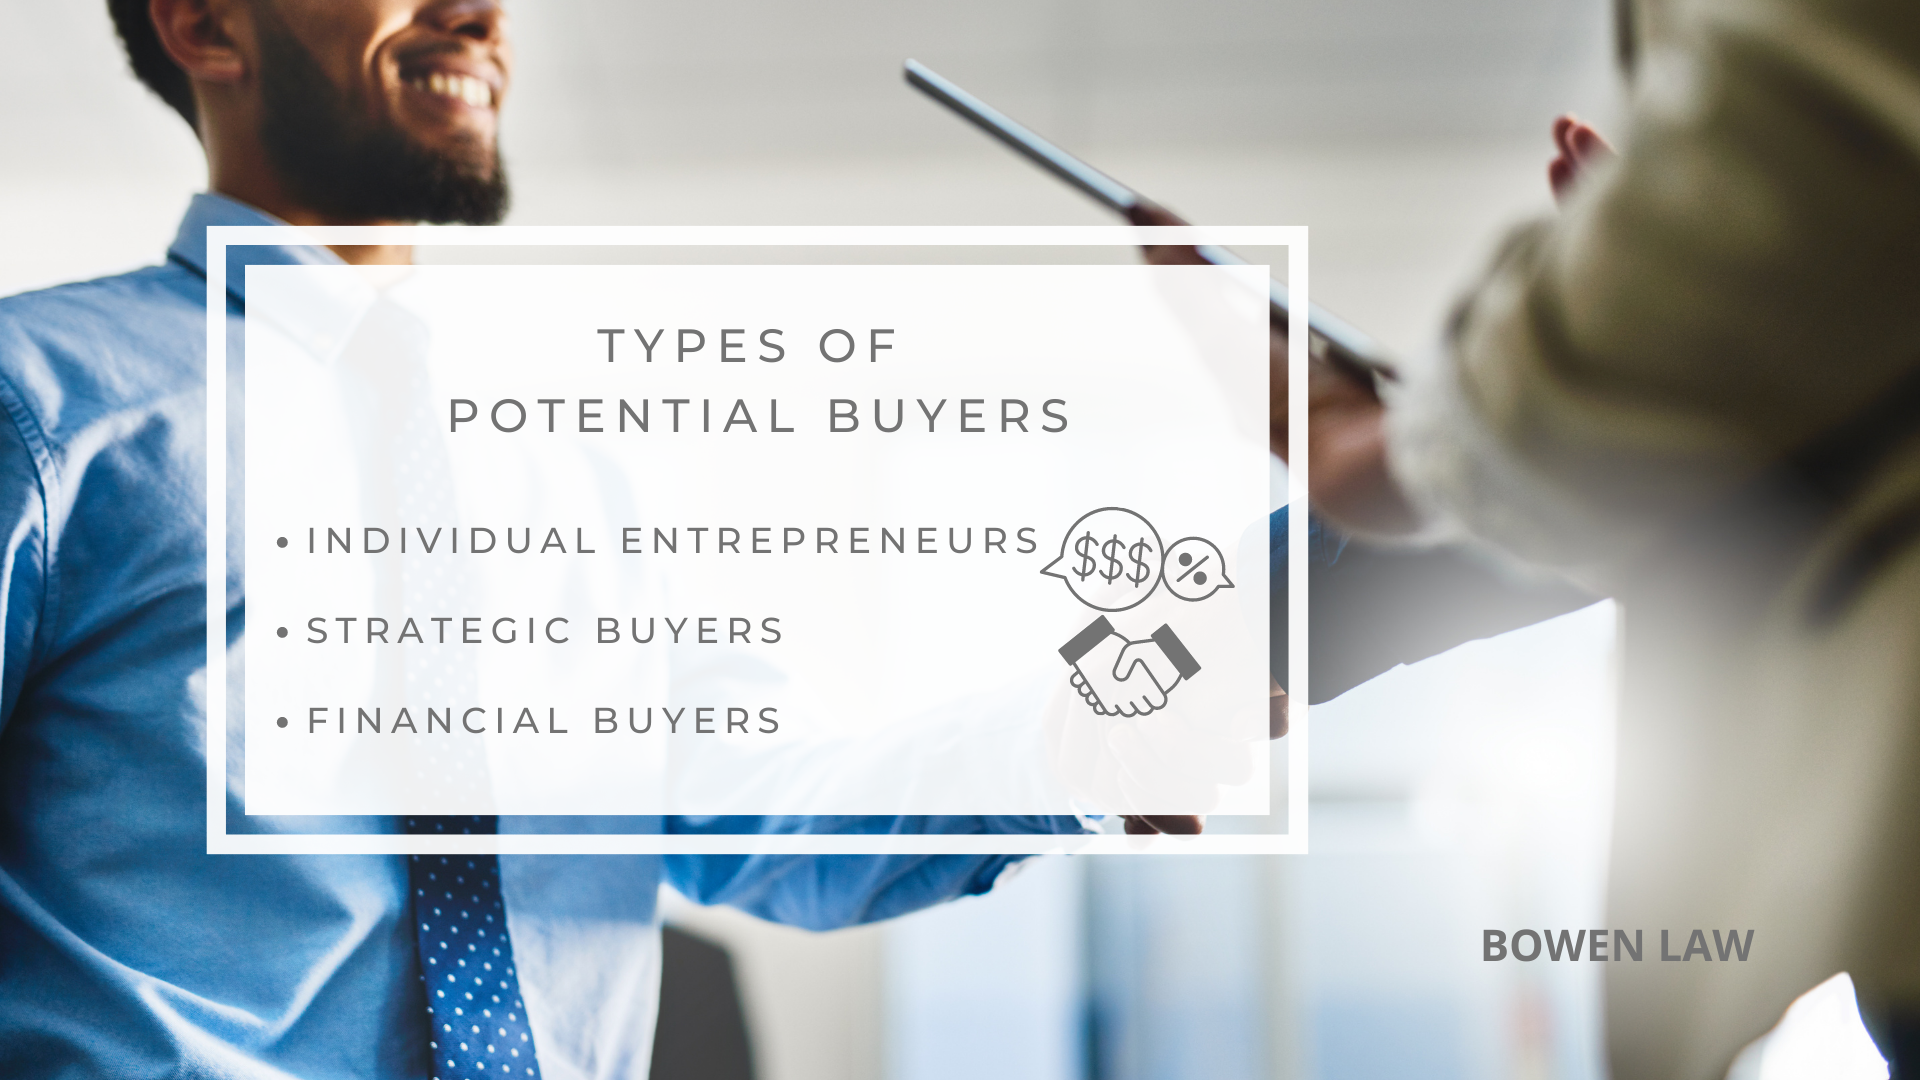 Infographic image of types of potential buyers